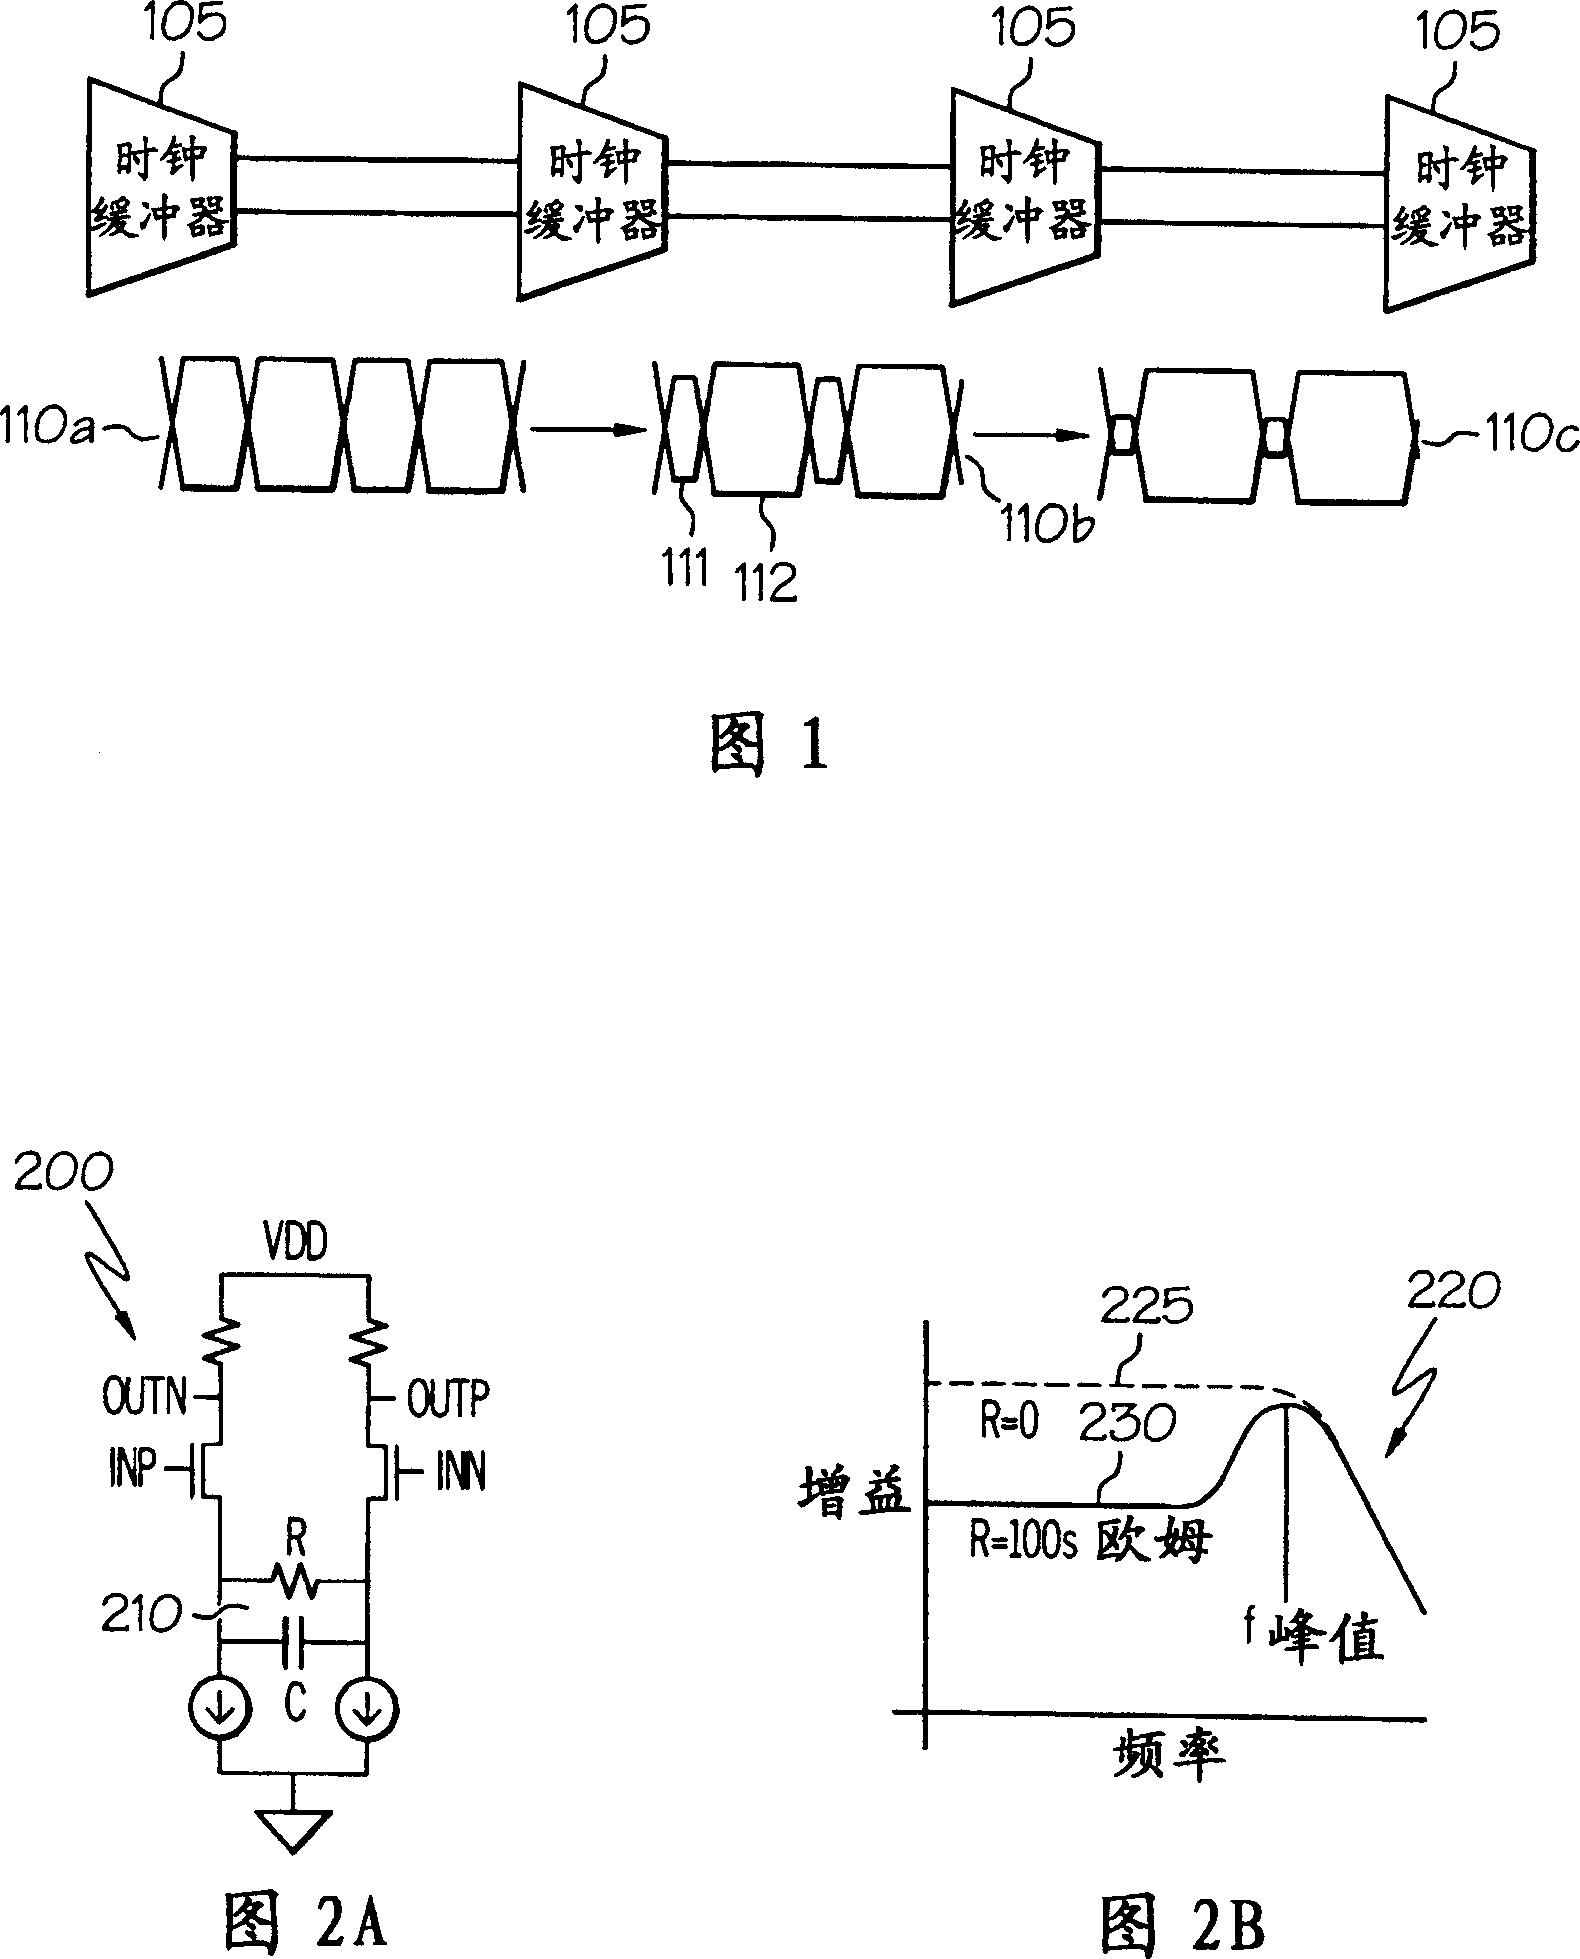 Duty-cycle correction circuit and method for differential clocking